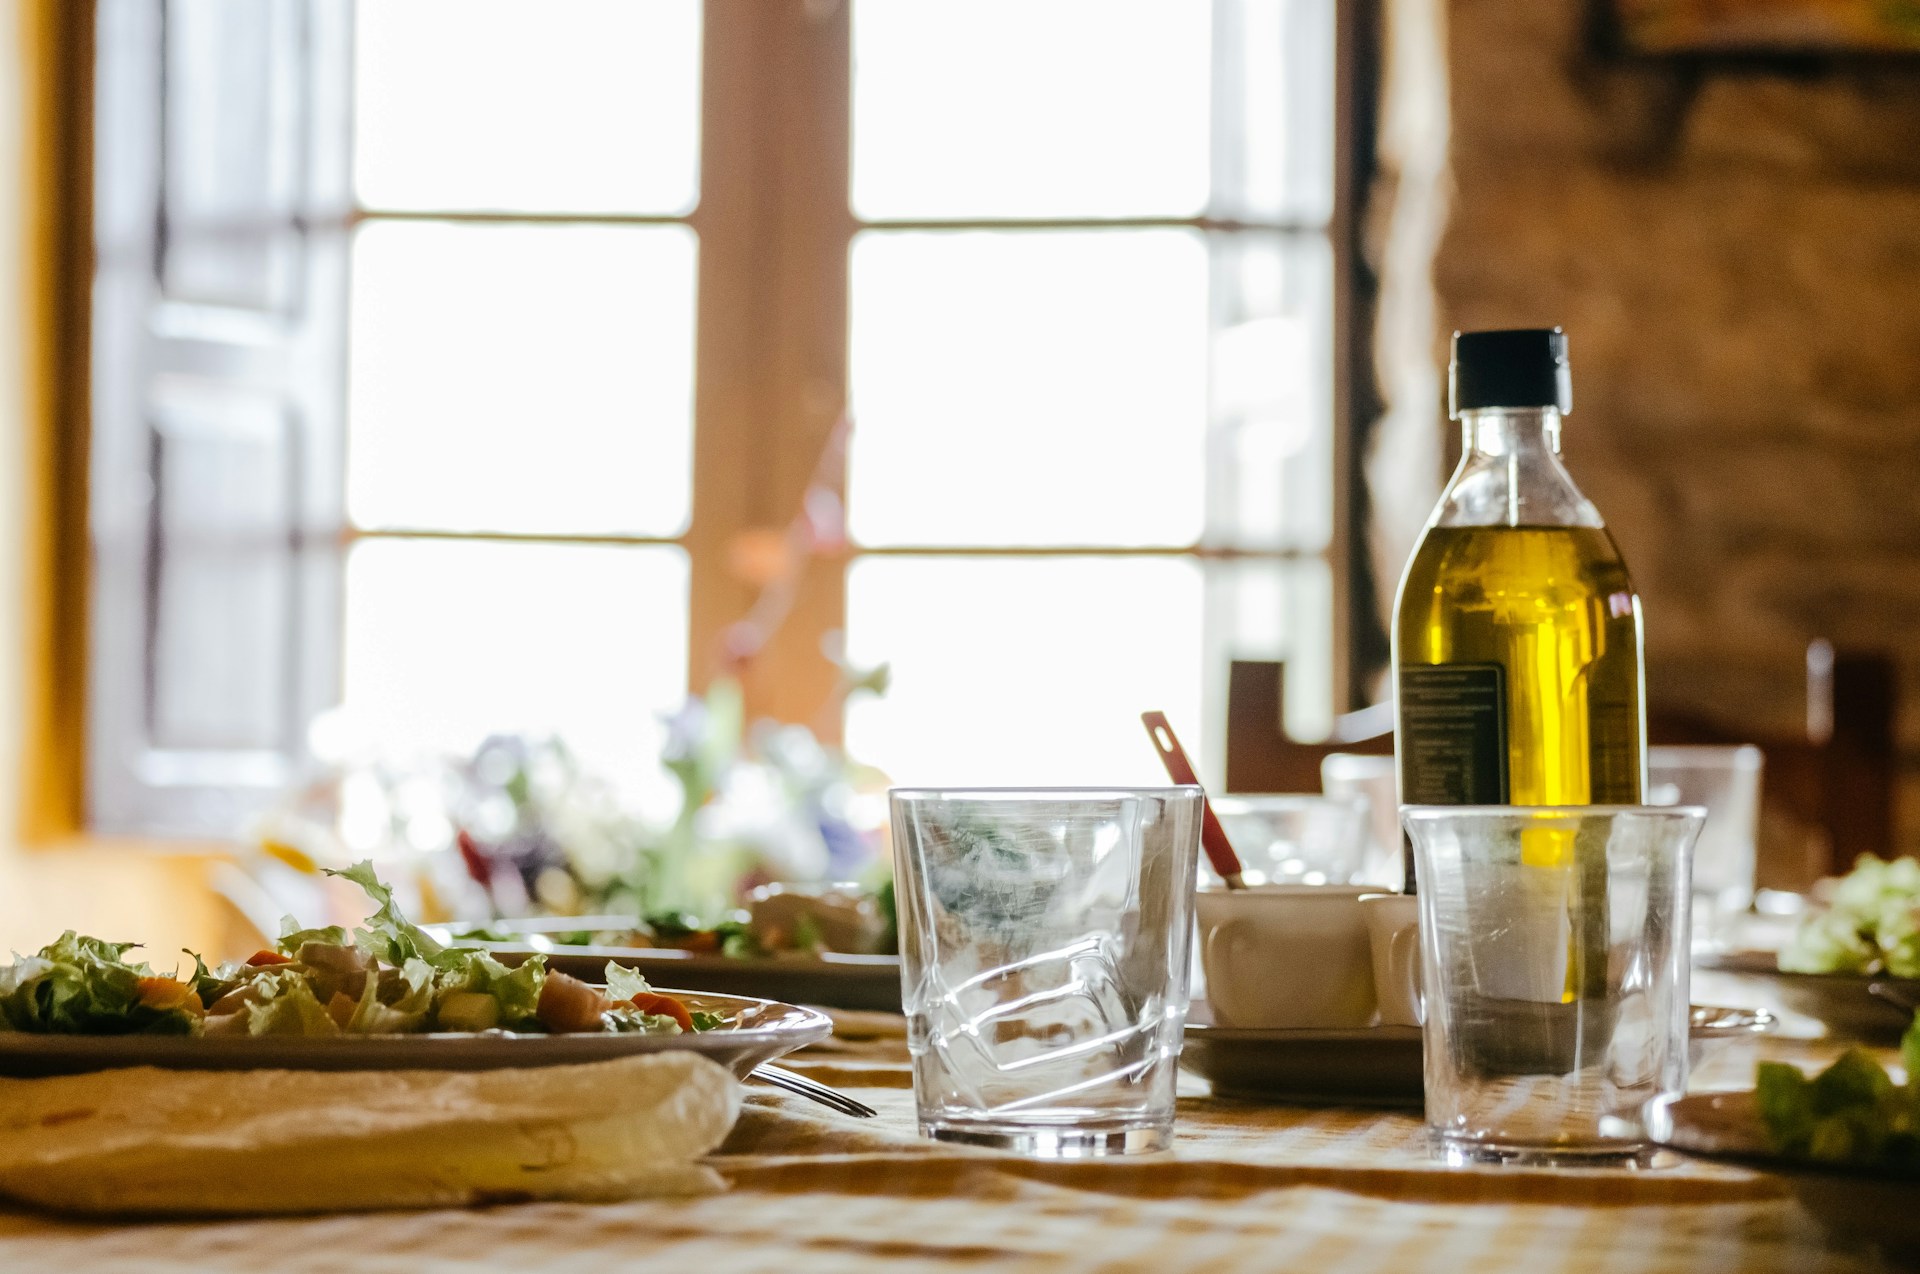 Alternatives to further virgin olive oil?  How about rapeseed oil